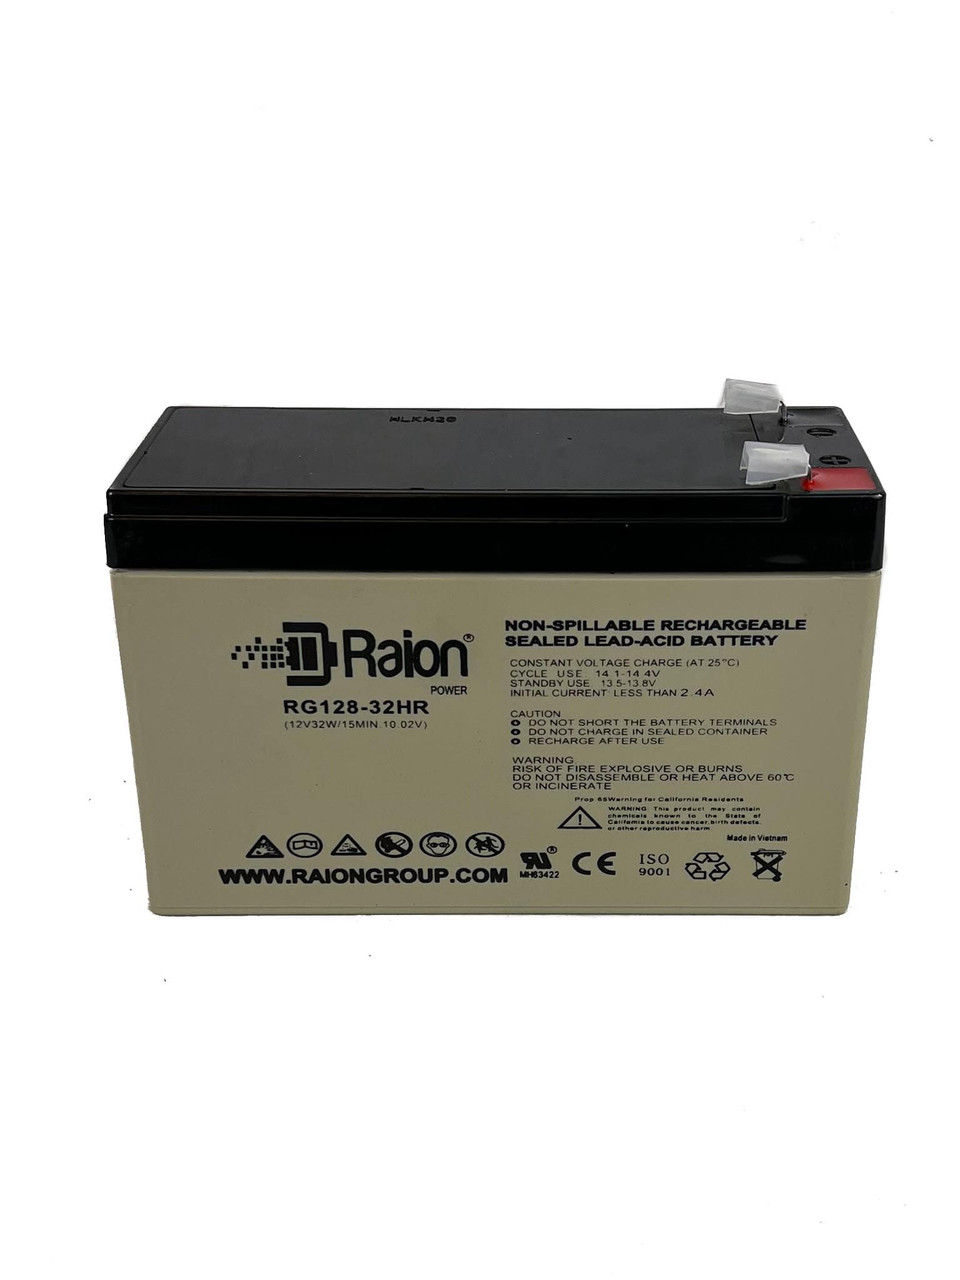 Raion Power RG128-32HR Replacement High Rate Battery Cartridge for Toshiba 5KVA 240VOLT